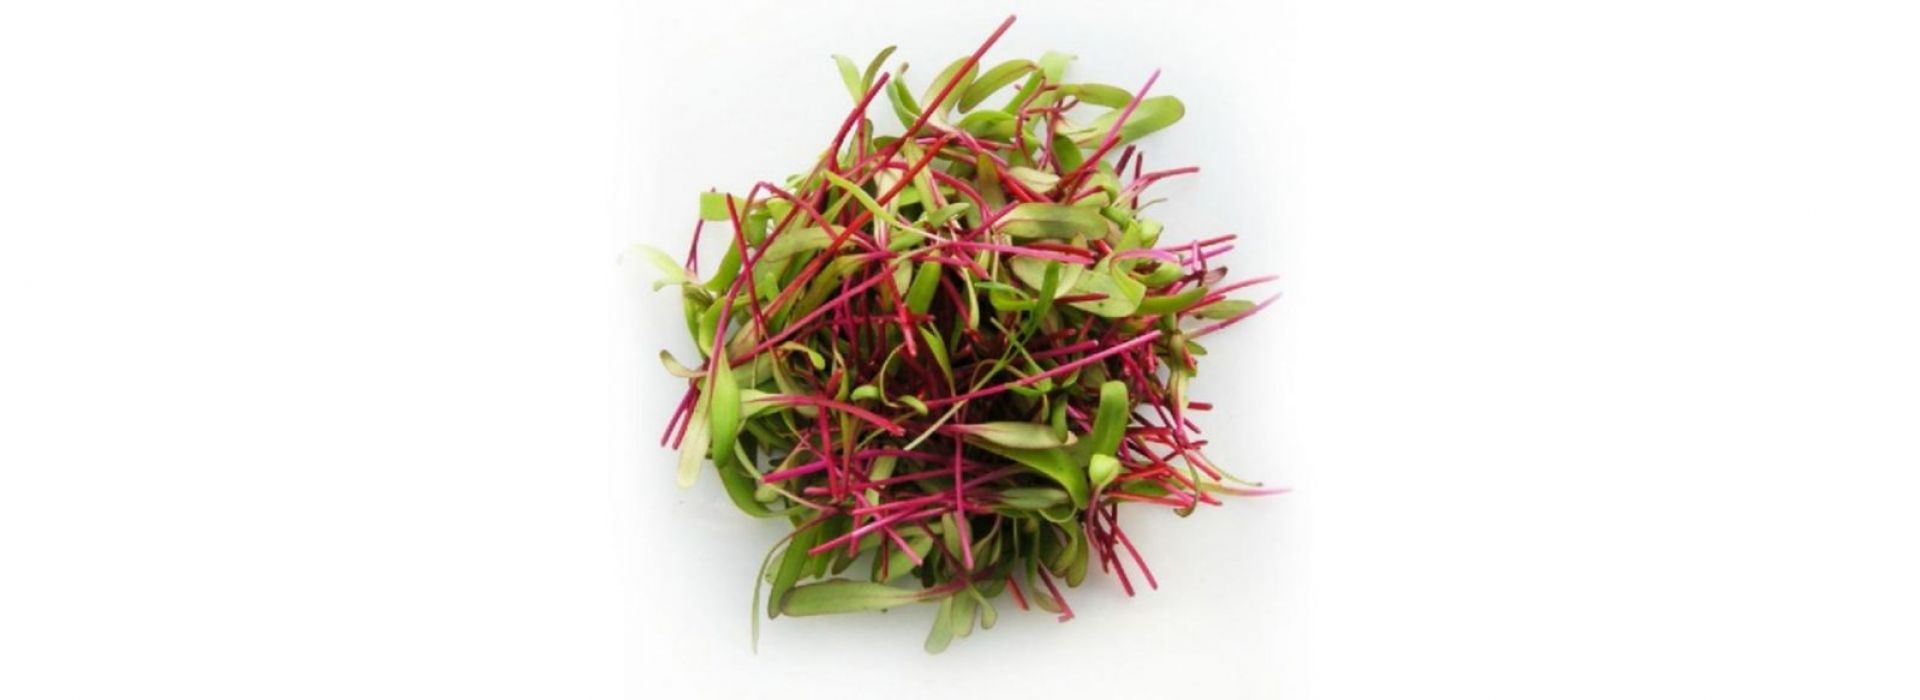 Sprout Beetroot